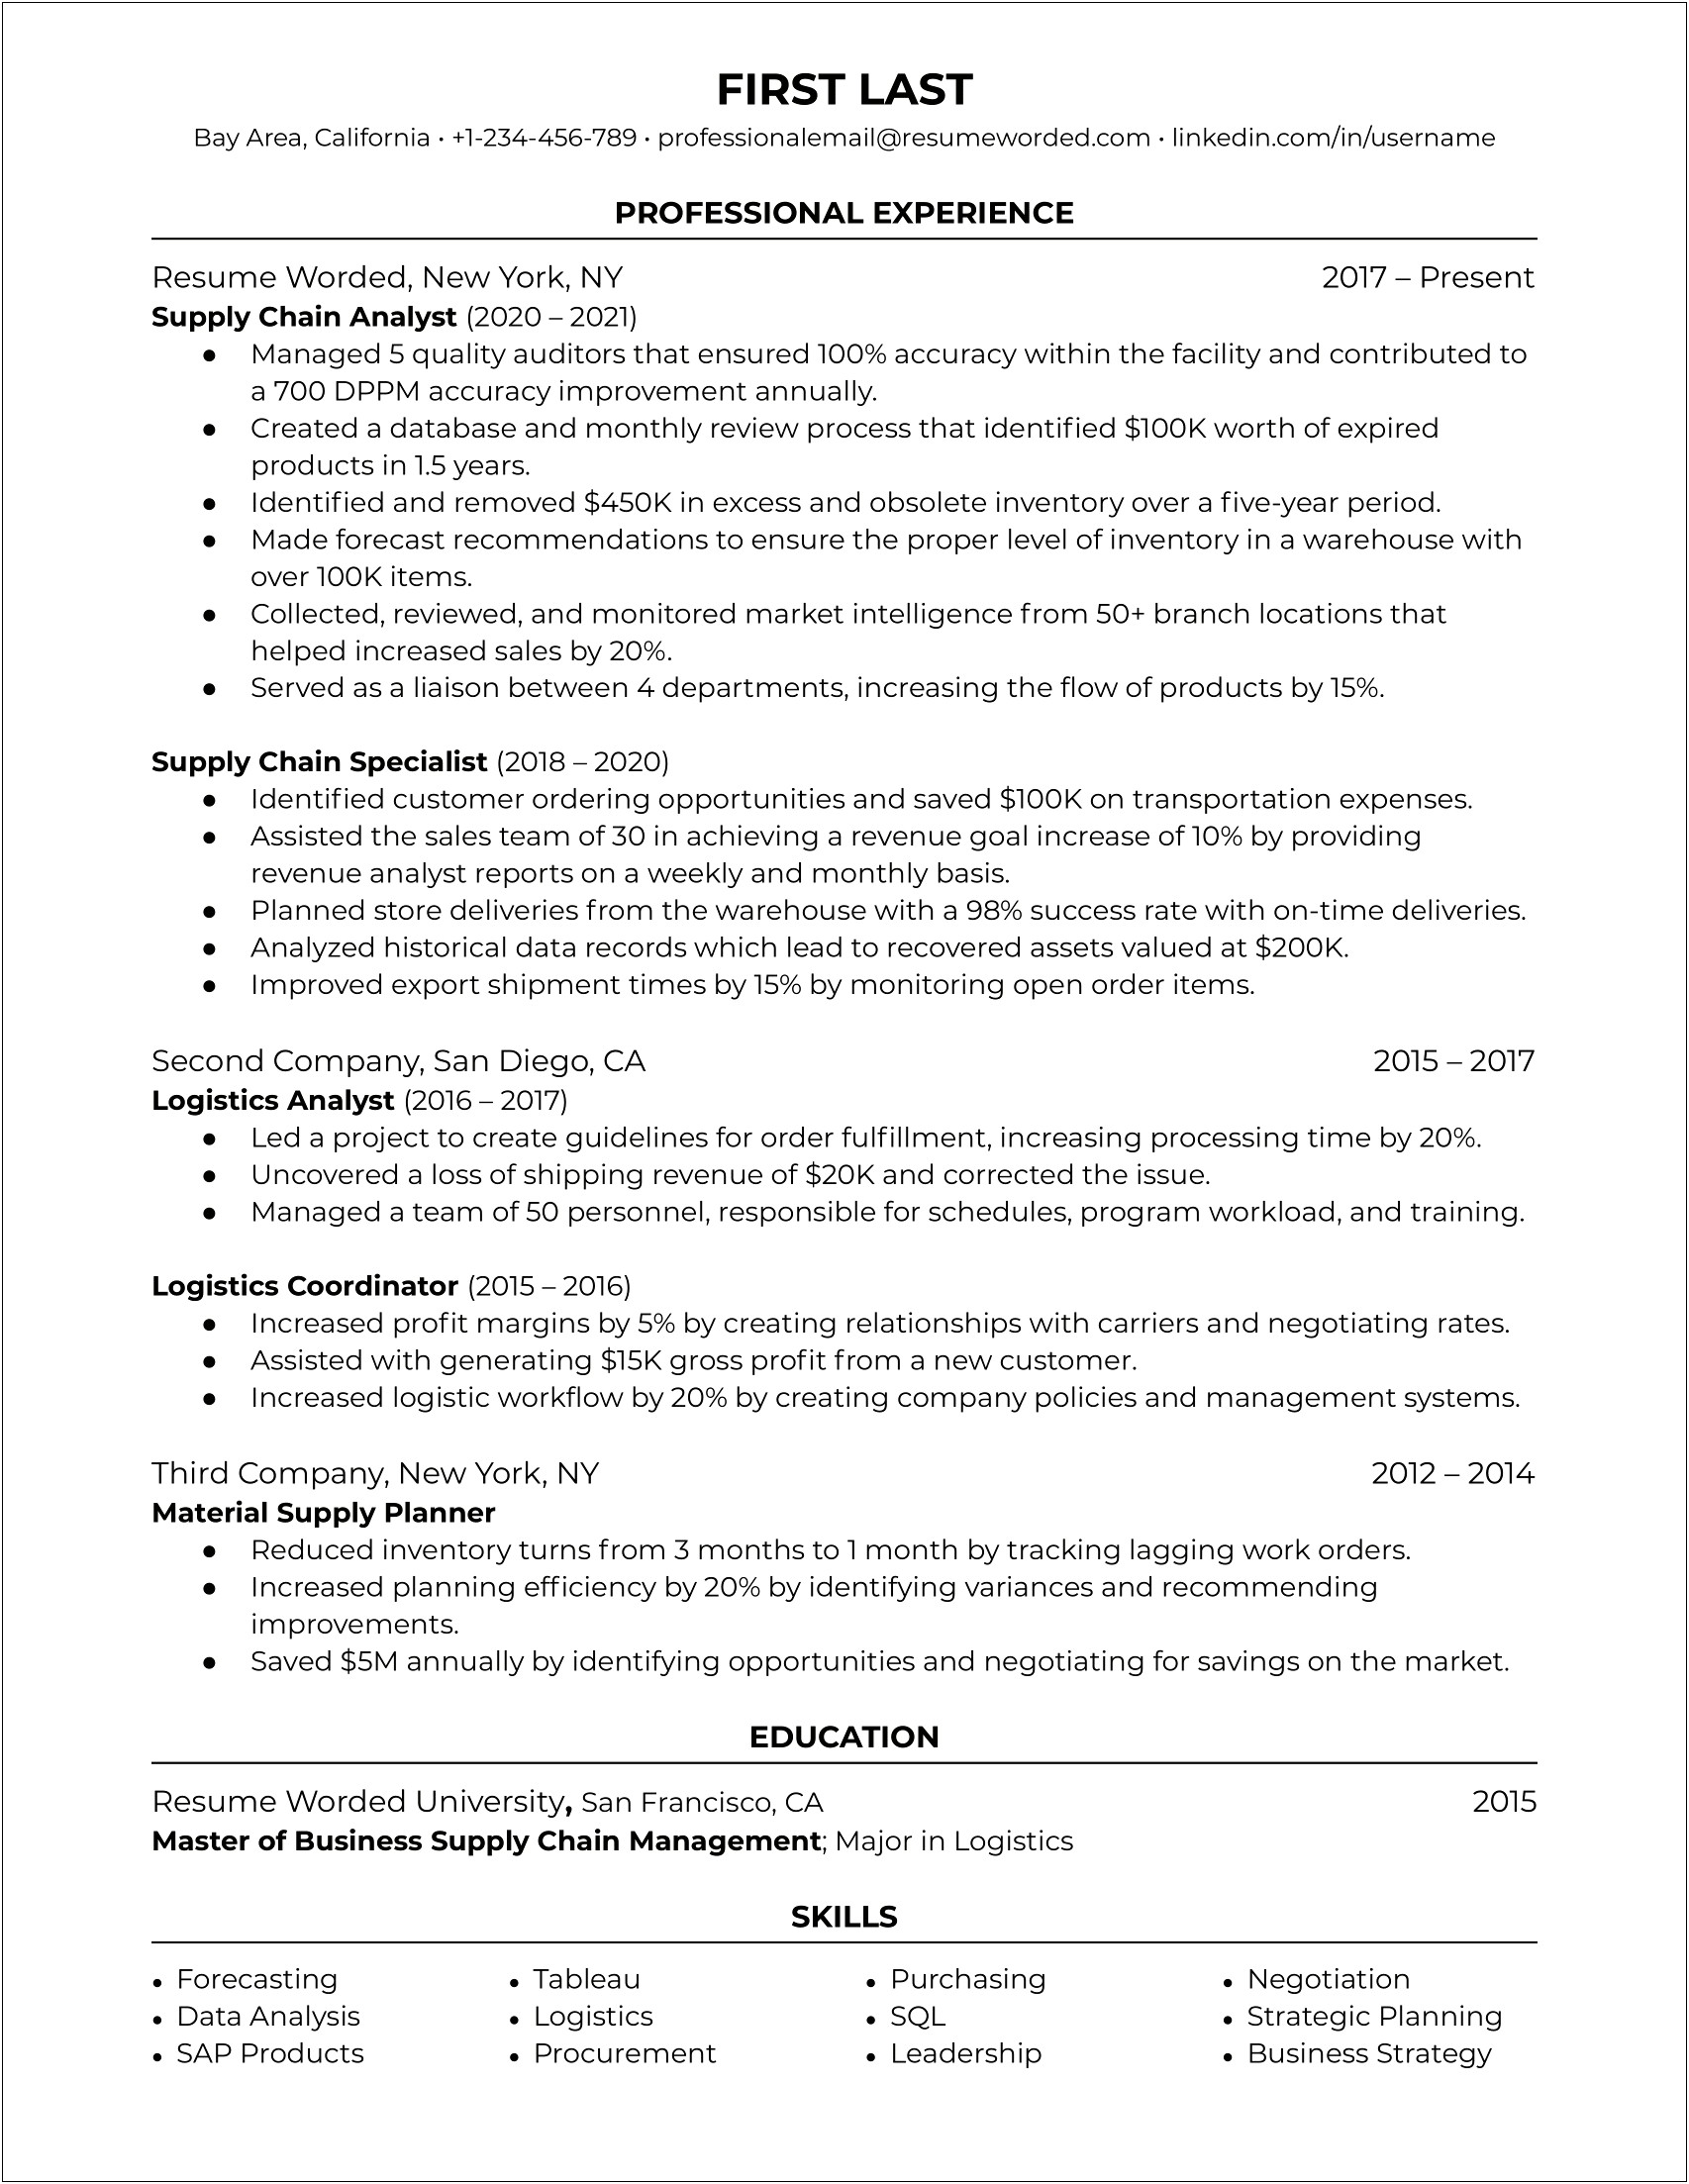 A Good Resume Summary For Supply Chain